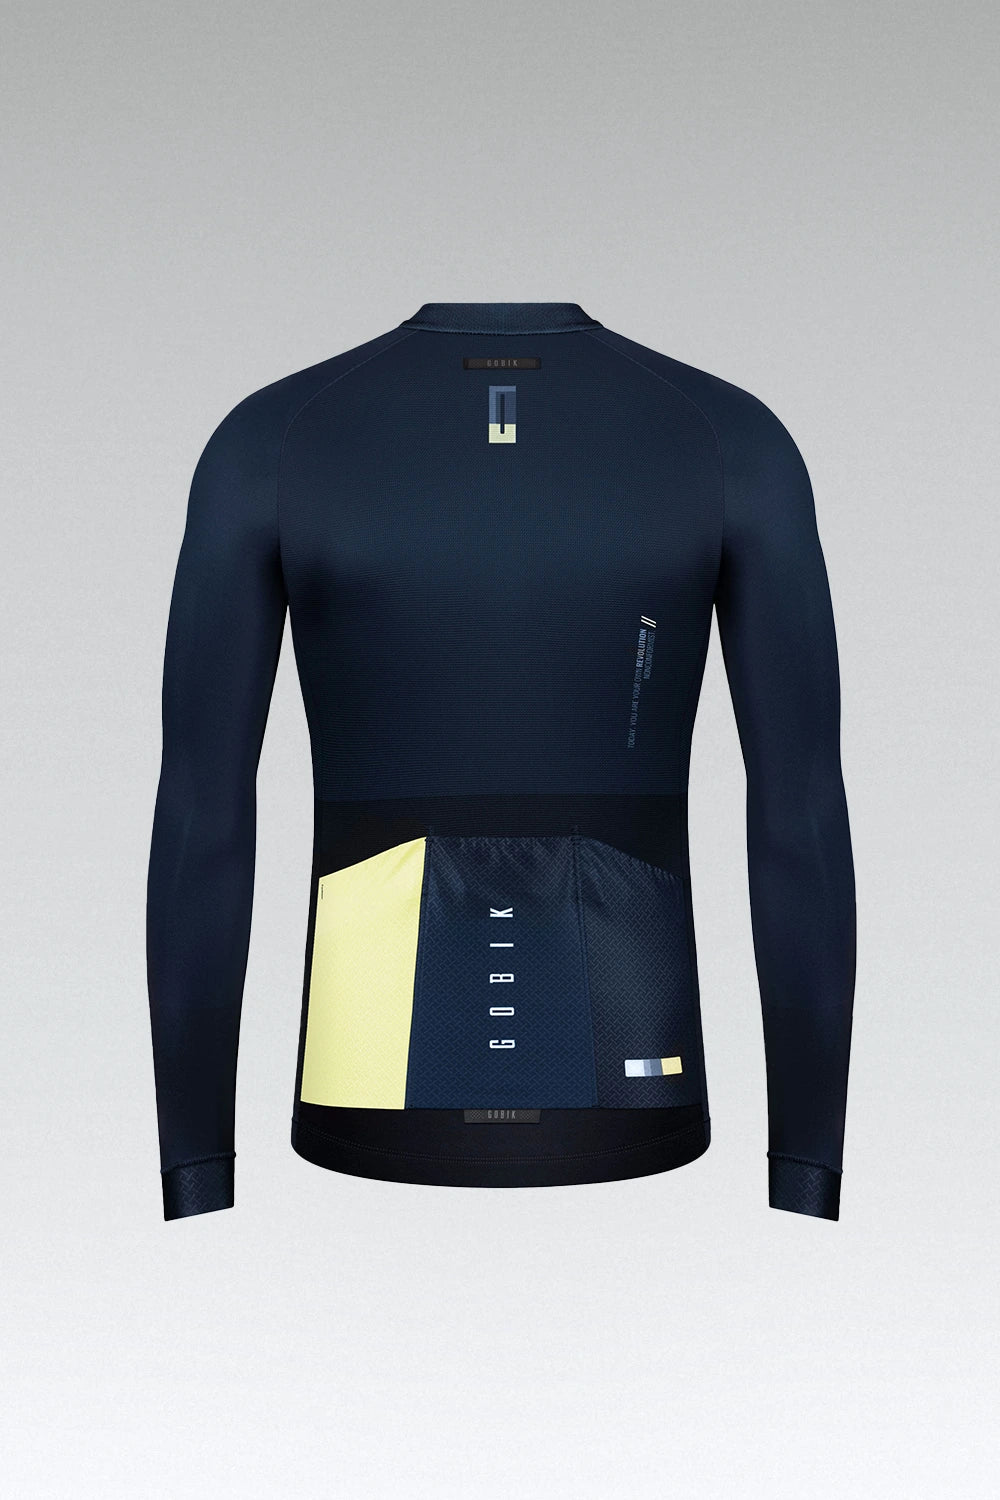 MAILLOT MANCHES LONGUES CX PRO UNISEX DARK NAVY